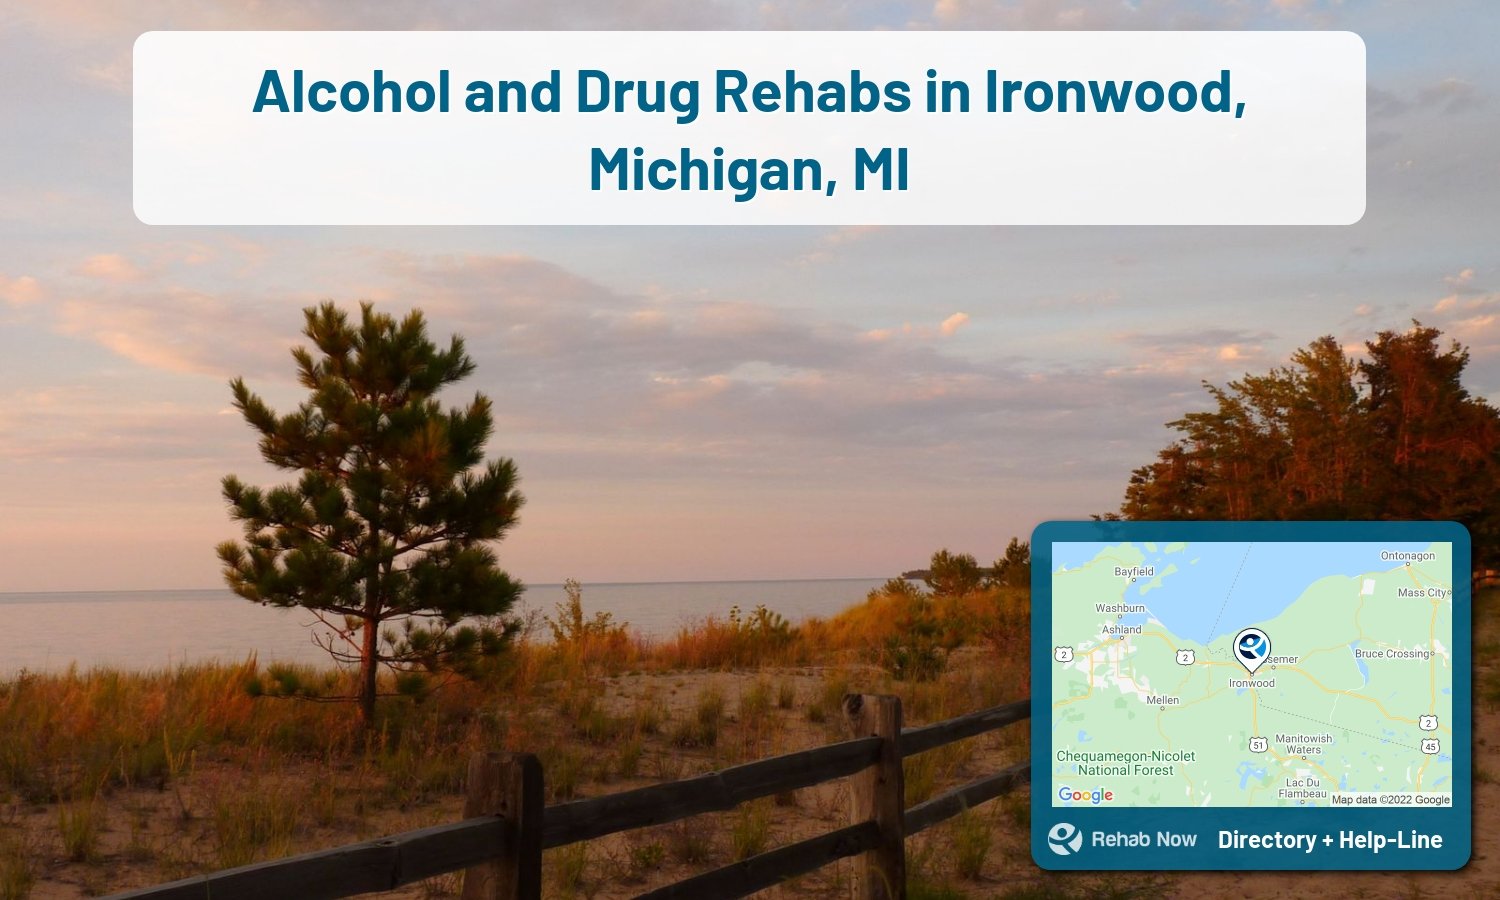 List of alcohol and drug treatment centers near you in Ironwood, Michigan. Research certifications, programs, methods, pricing, and more.